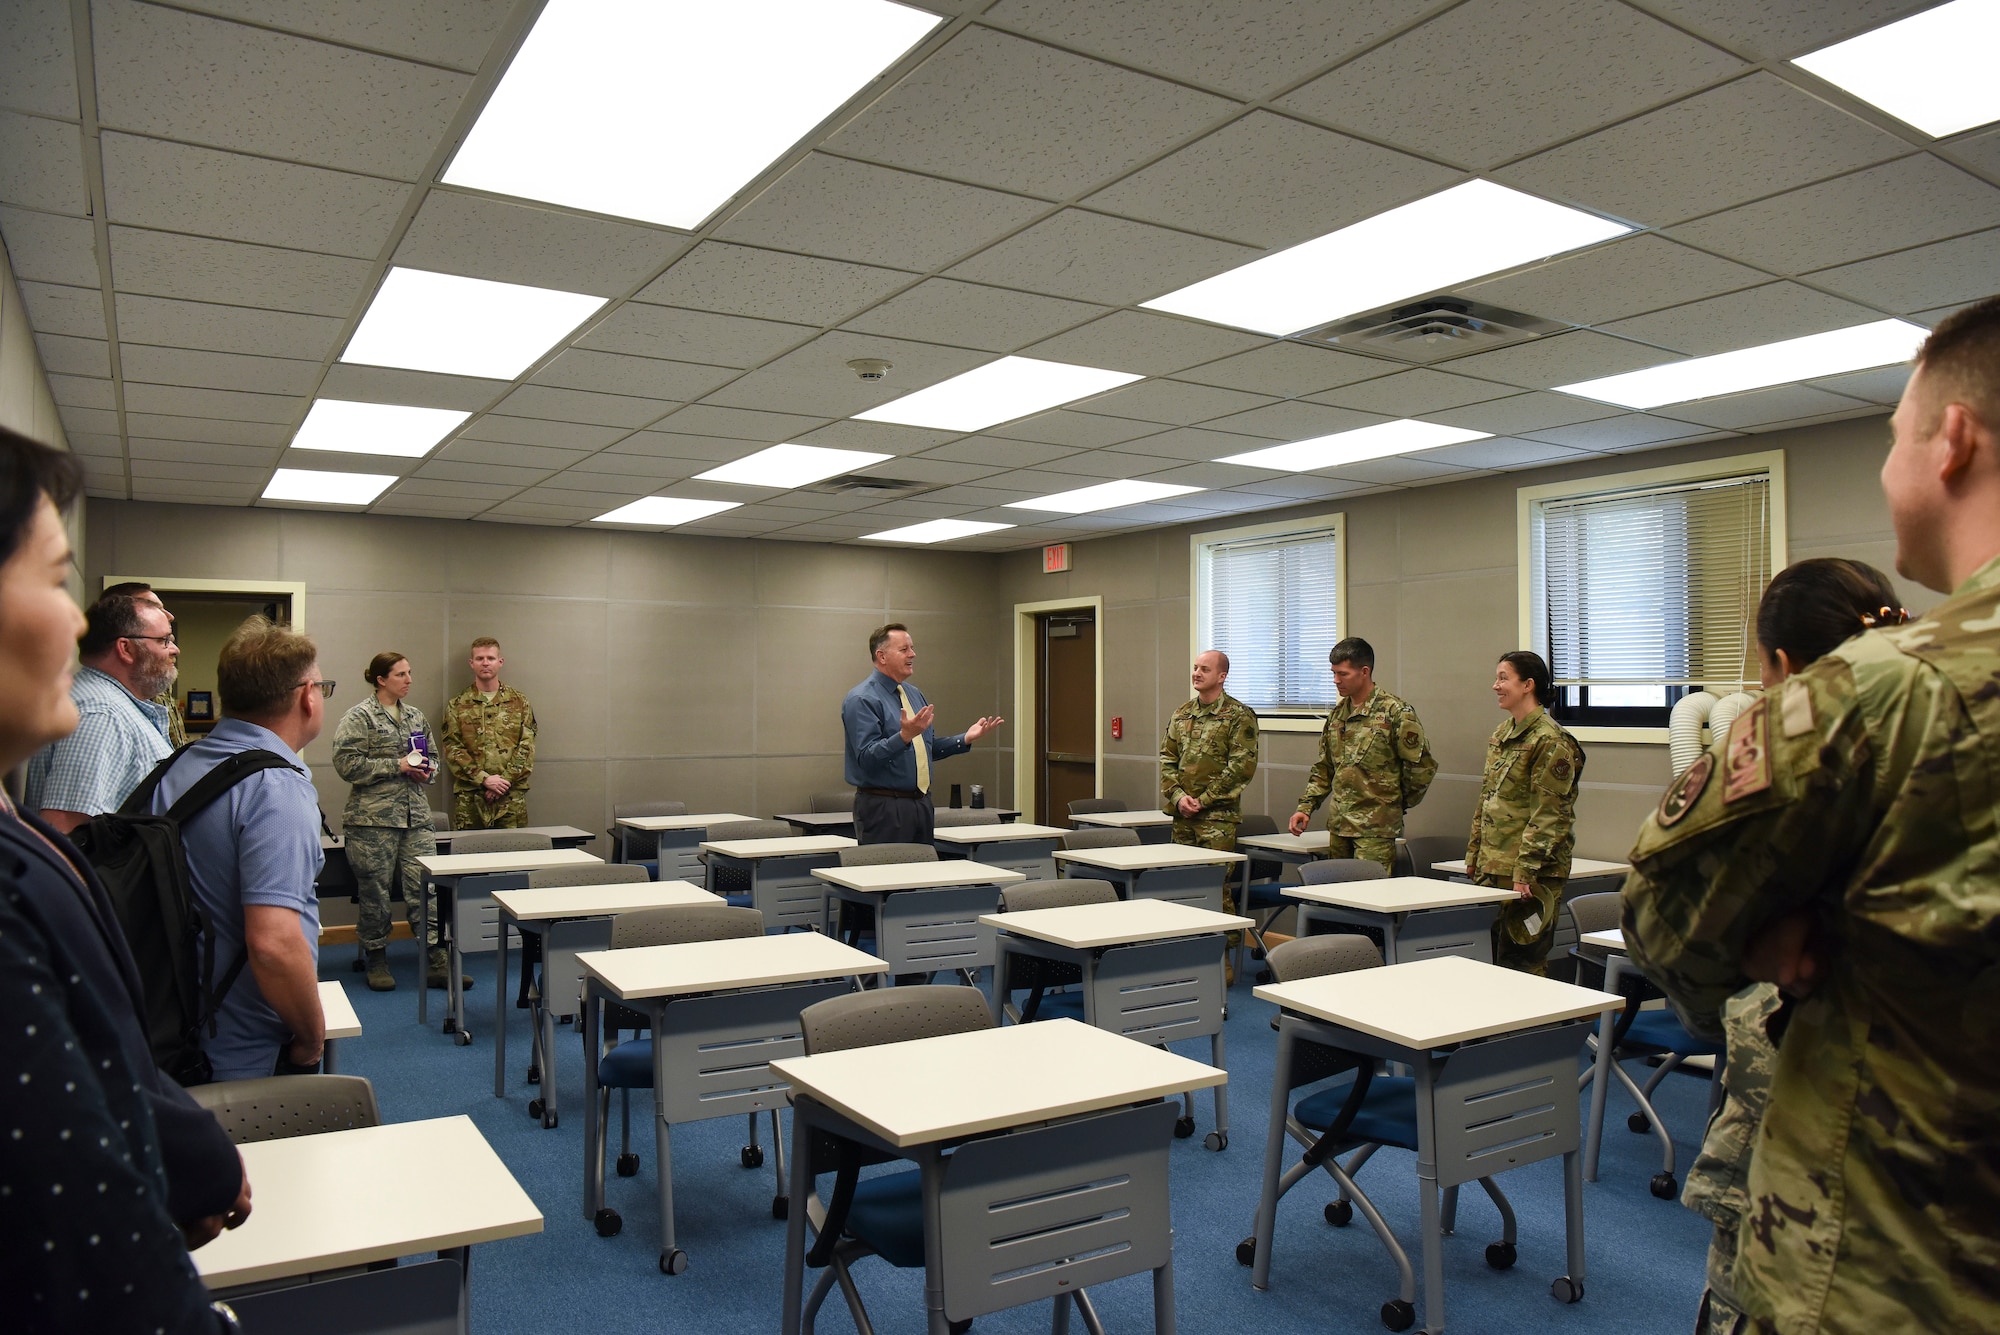 The 8th Fighter Wing leadership toured the newly renovated education center at Kunsan Air Base, Republic of Korea, May 22, 2019. All professional military education testing has been centralized to one location by creating a second testing room, expanding testing capabilities by 33 percent. (U.S. Air Force photo by Senior Airman Savannah L. Waters)